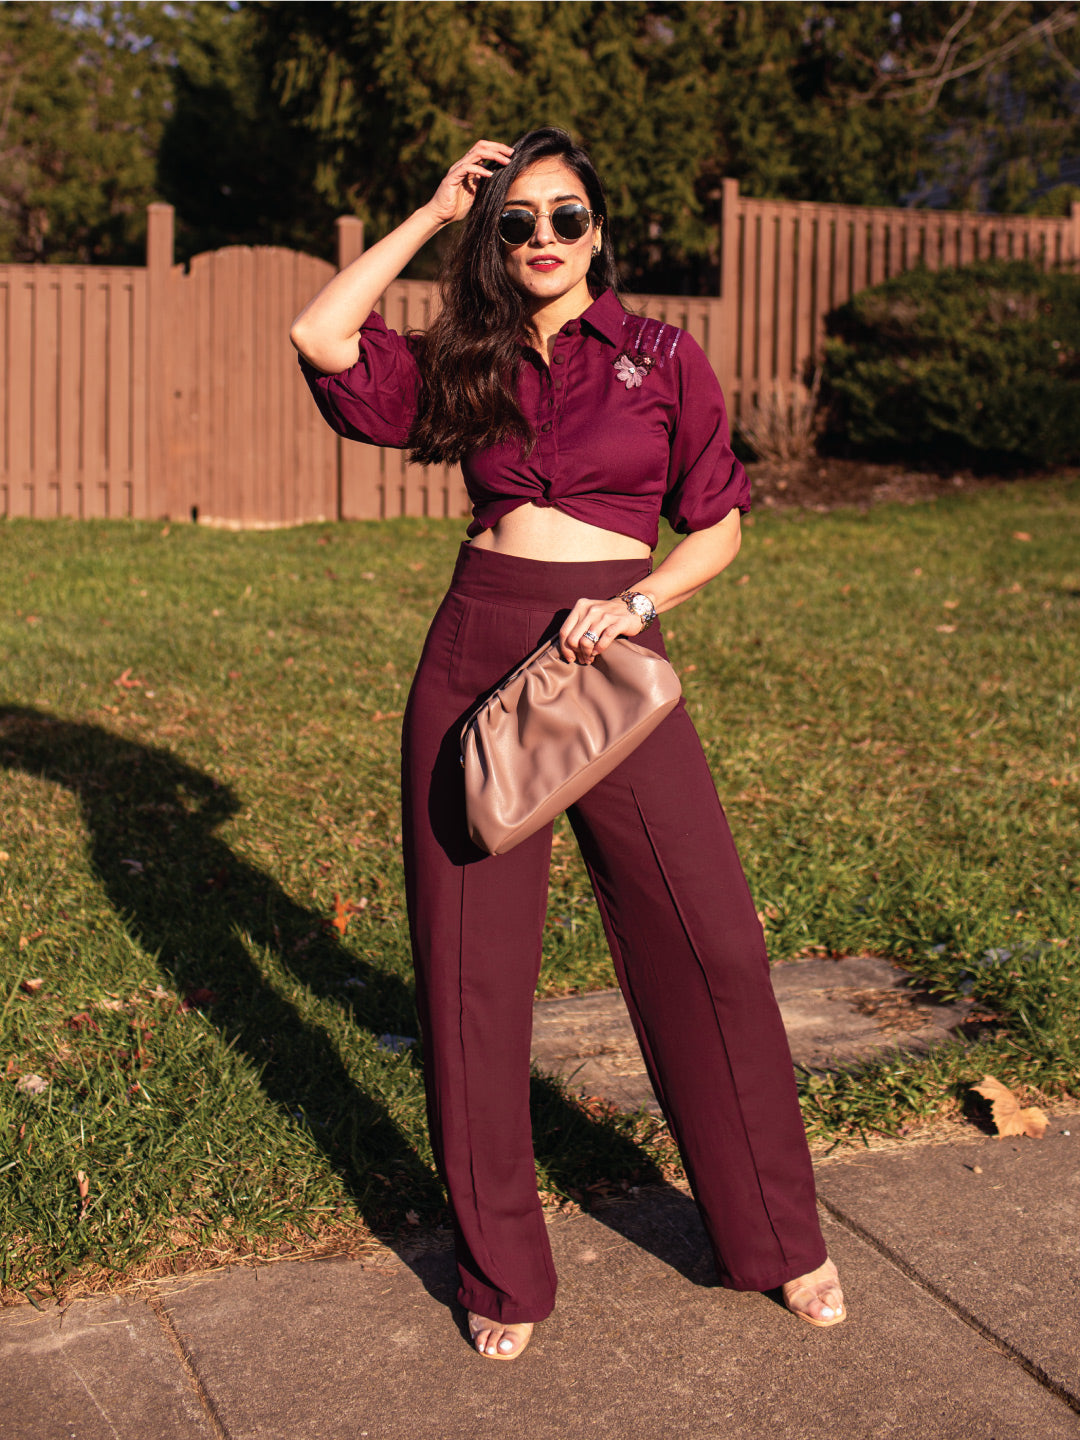 Blush and Burgundy | E's Life & Style | Dress pants outfits, Maroon pants  outfit, Bell bottom pants outfit